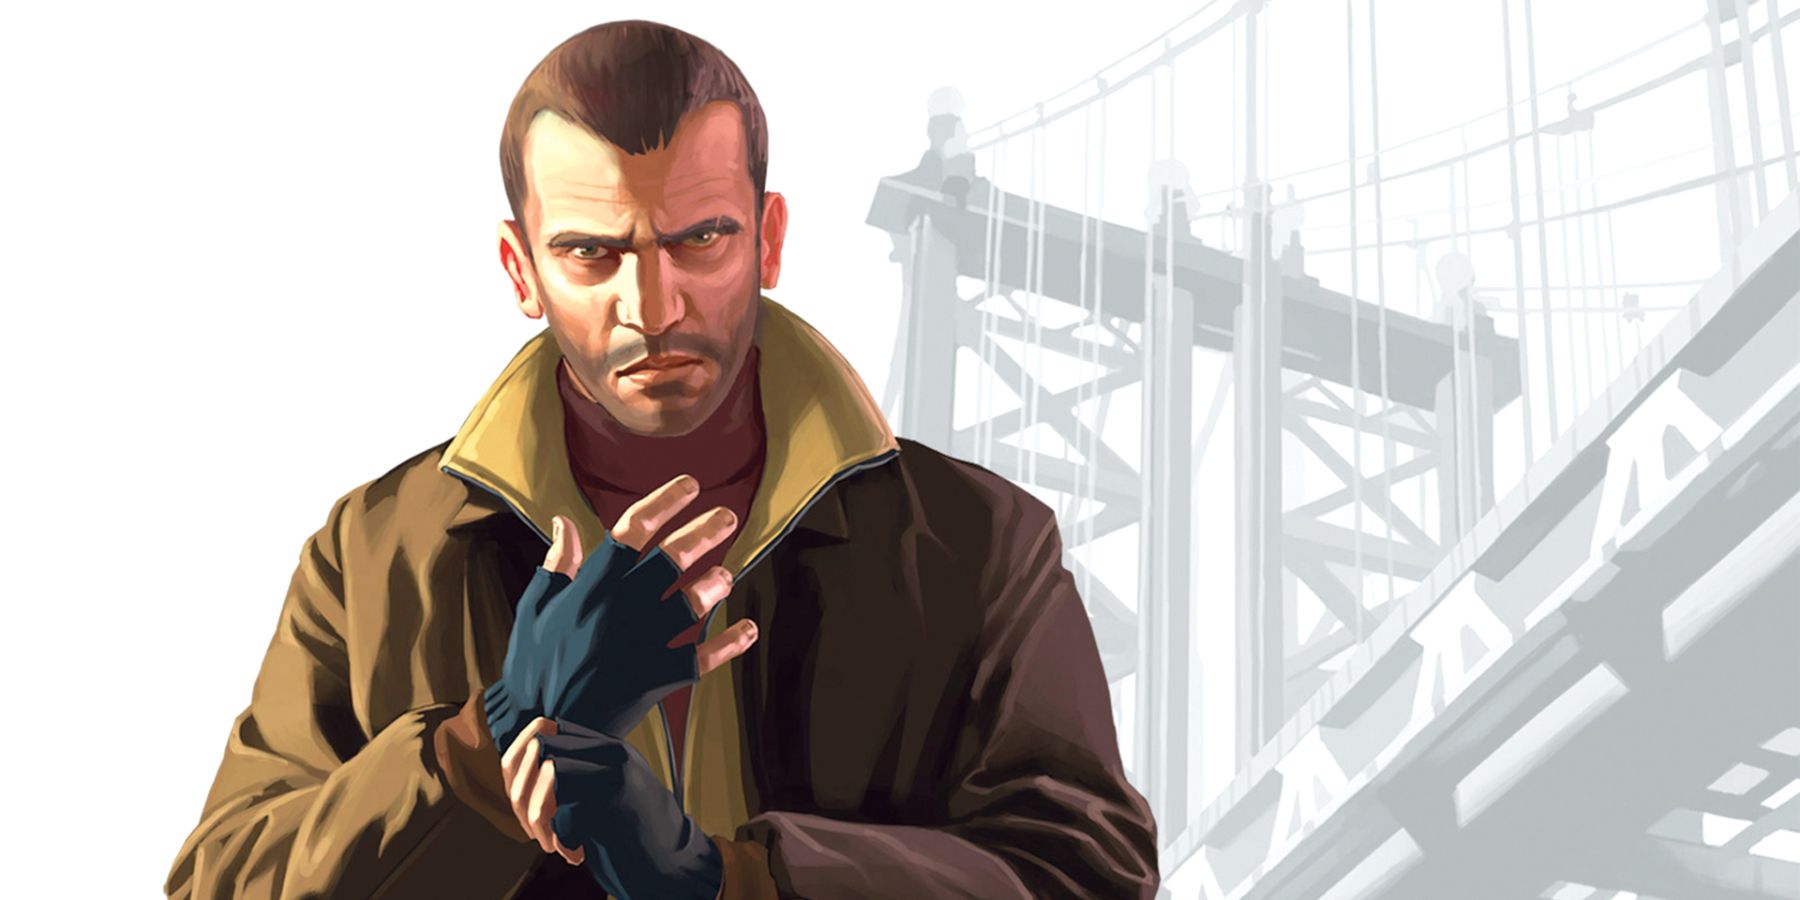 Promotional GTA 4 artwork of Niko Bellic pulling on fingerless gloves, with a black and white background of a Liberty City bridge.